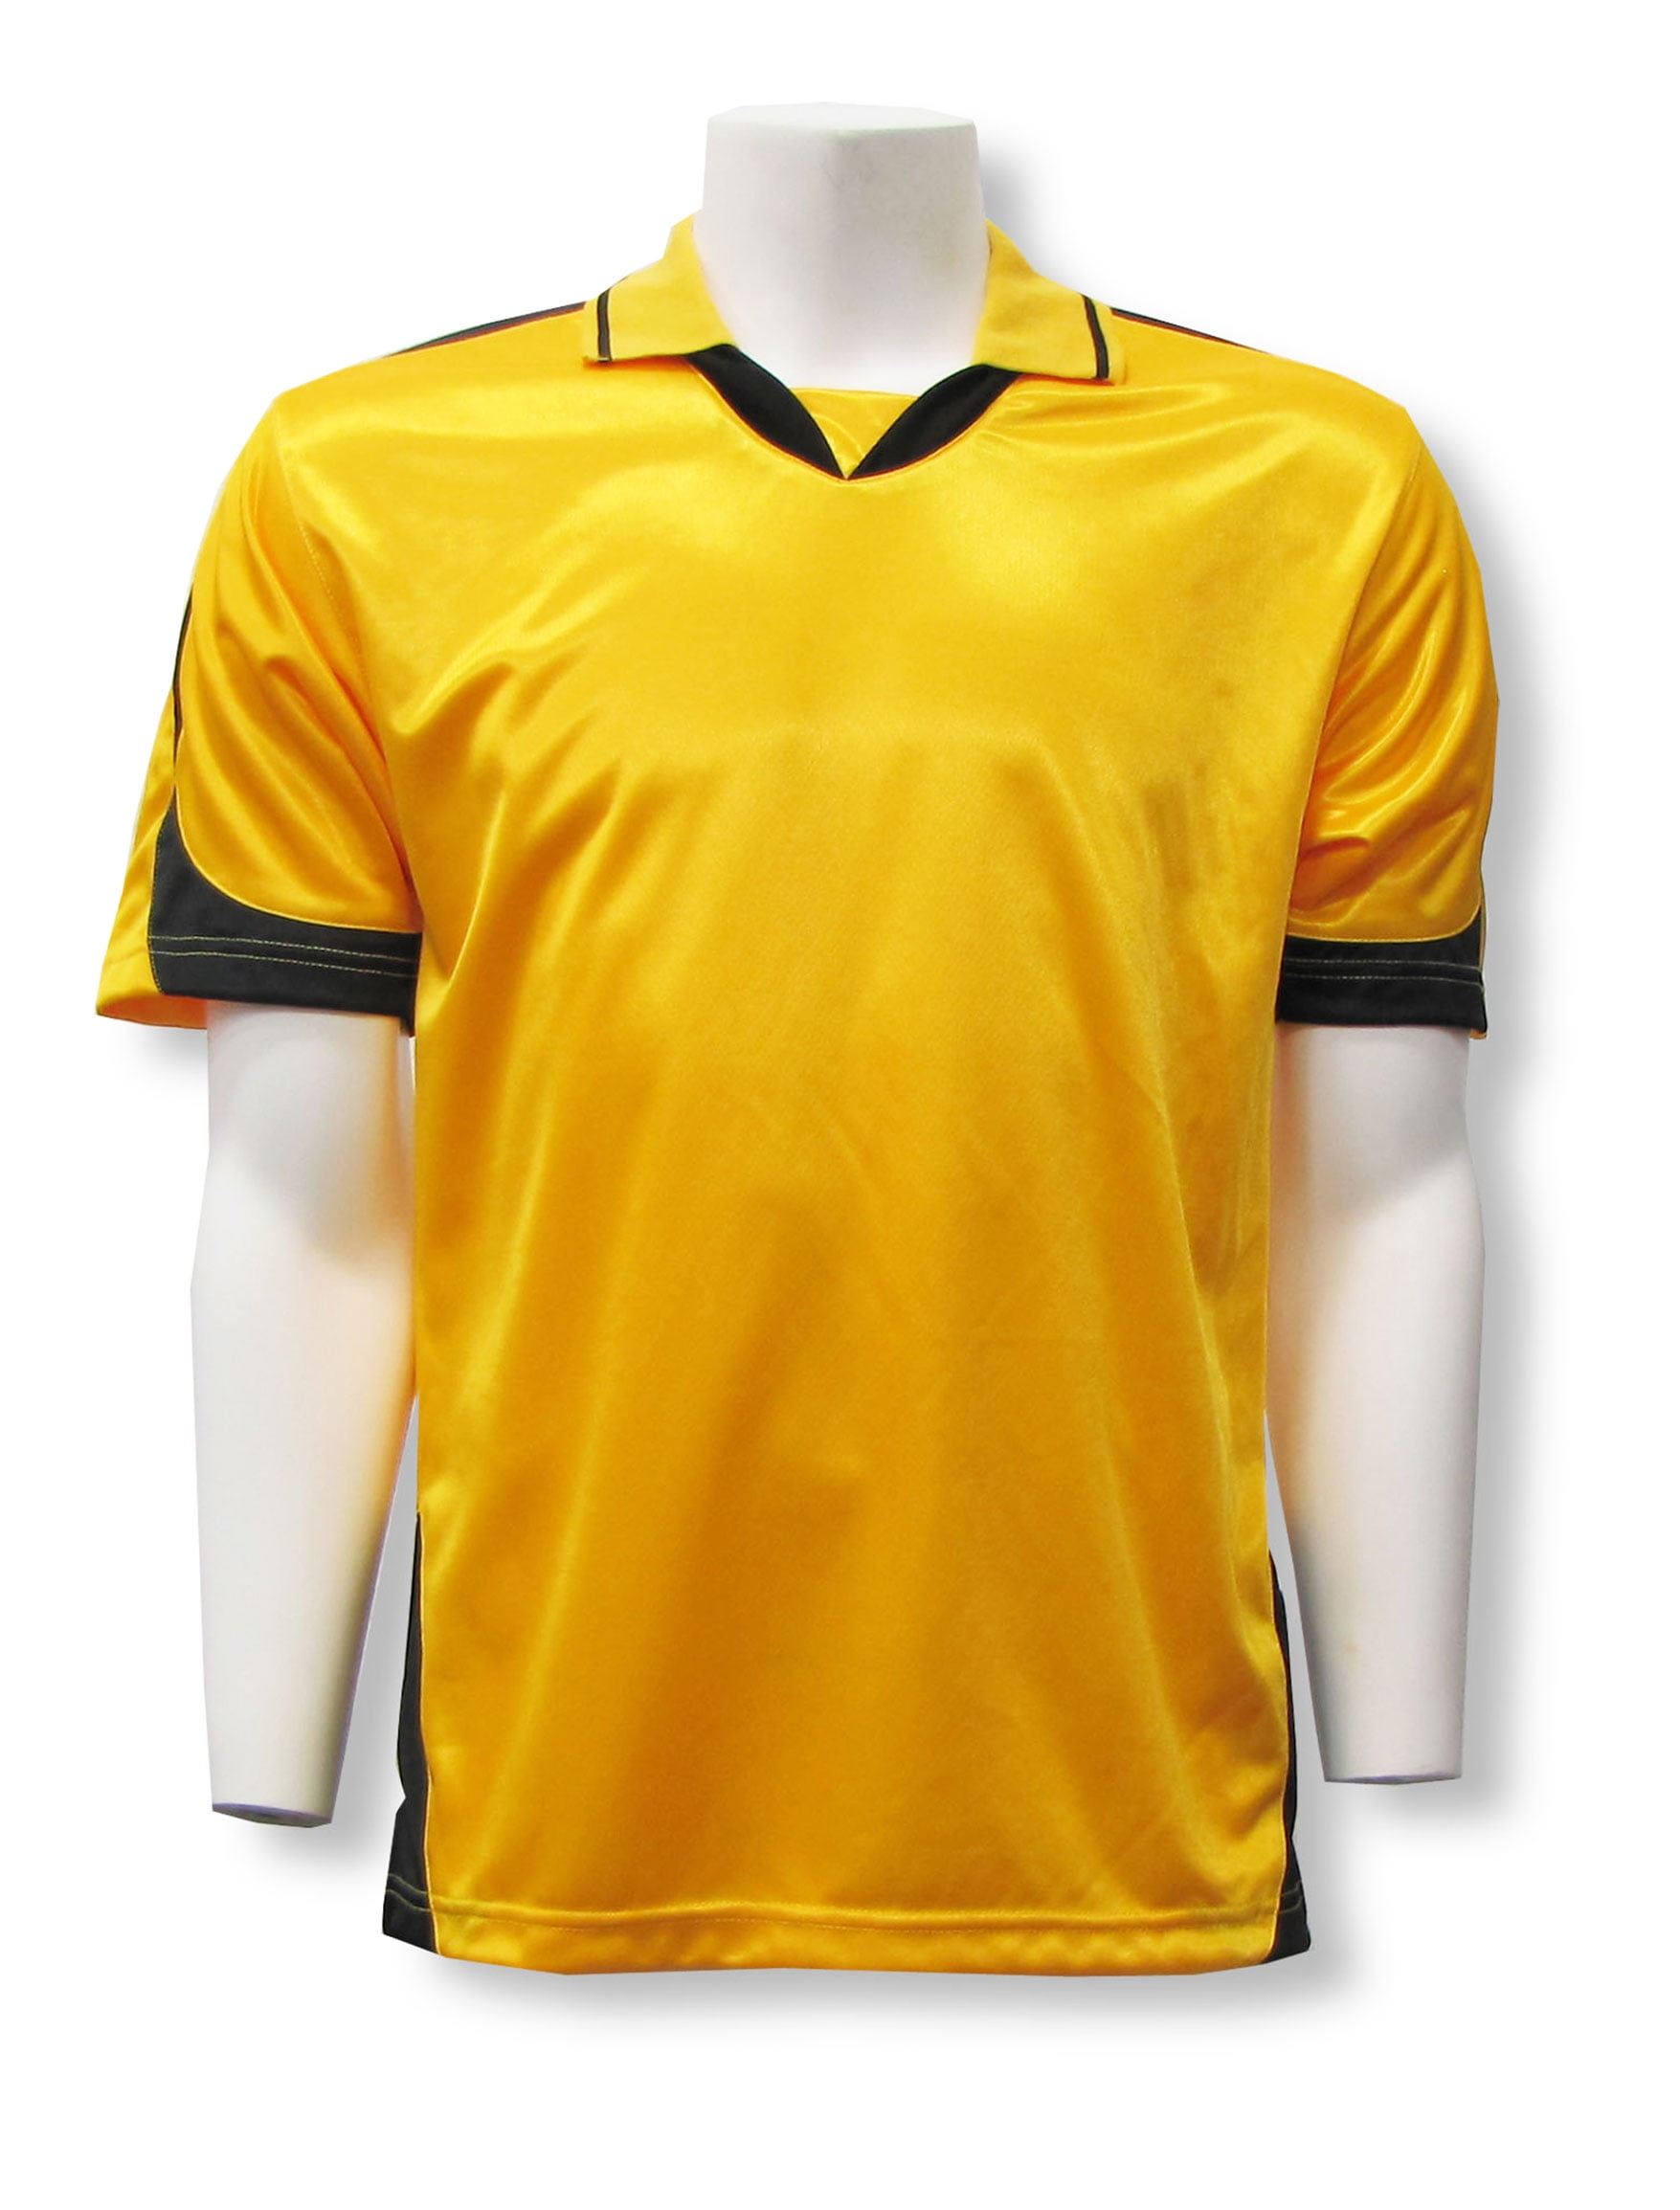 Alpha soccer jersey with collar (in 